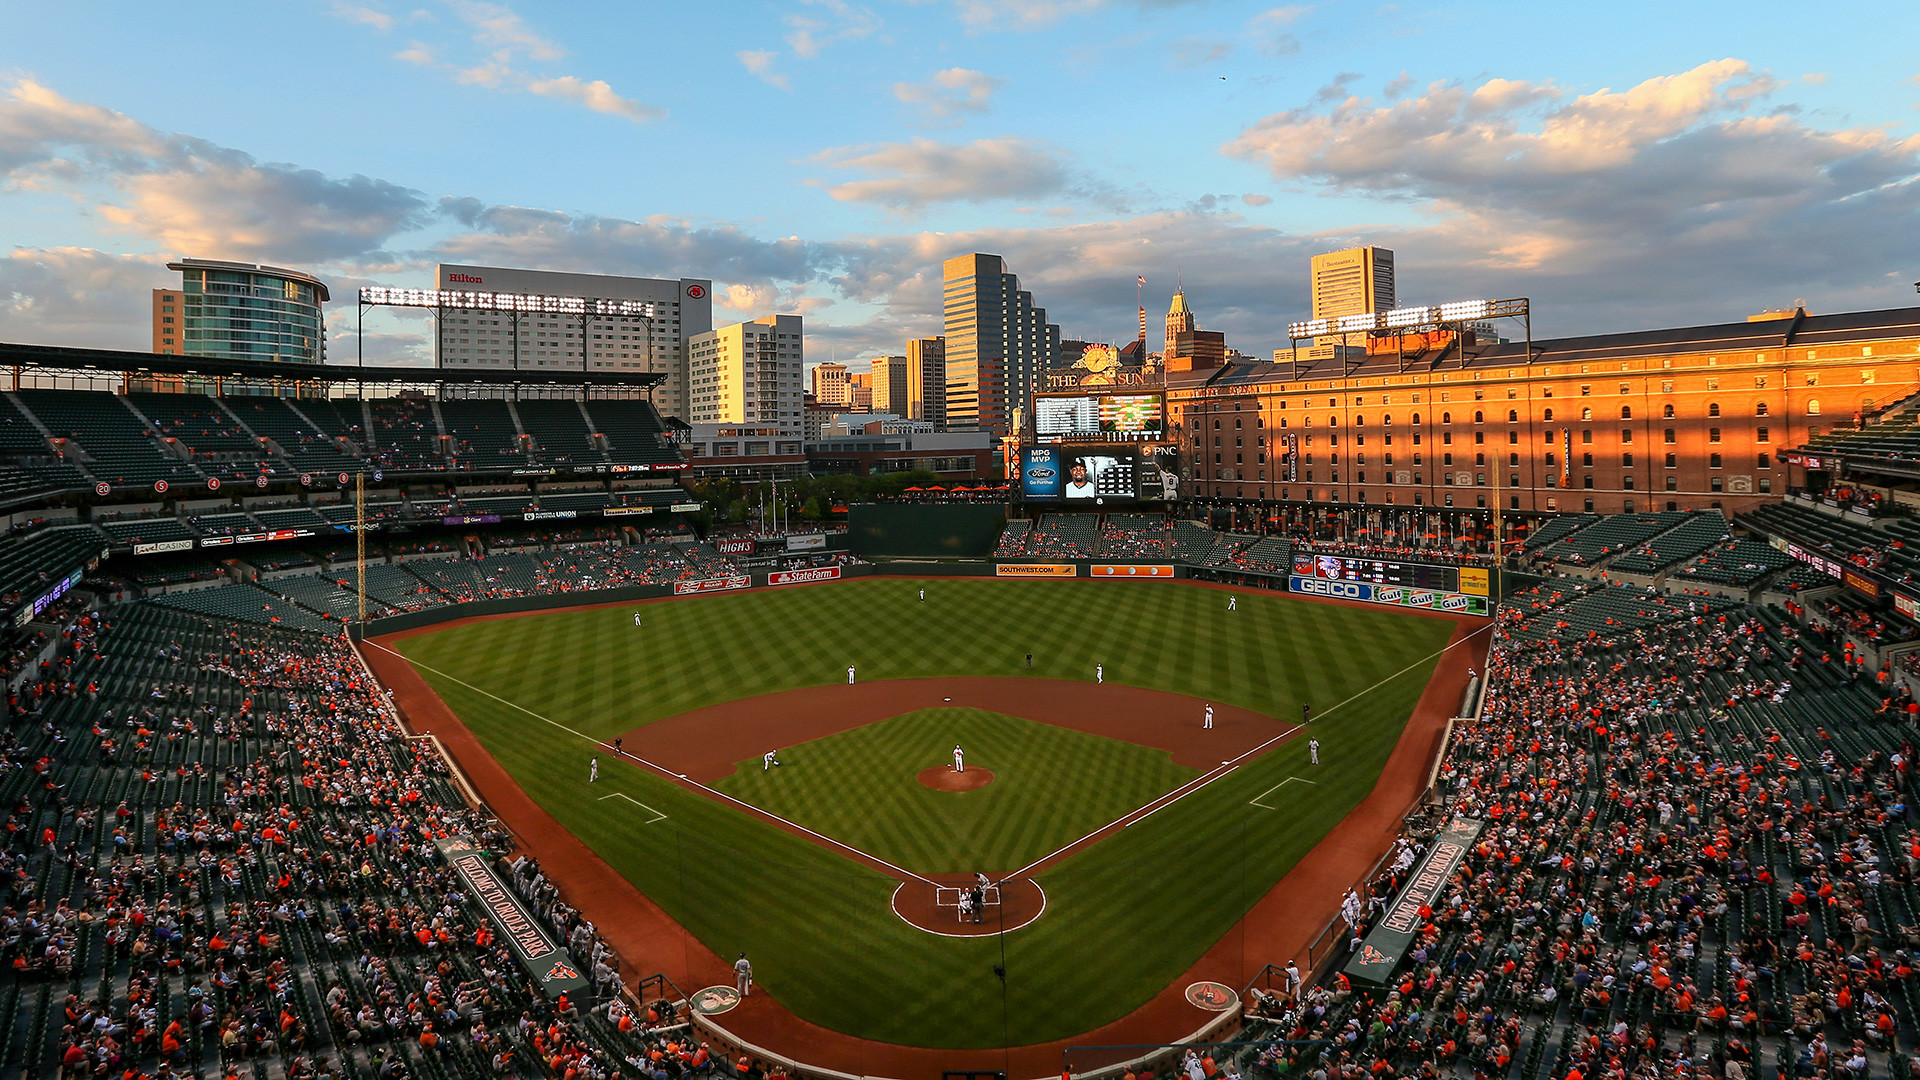 1920x1080 Ussports Baltimore likely to host 2016 All Star Game SPORTAL 